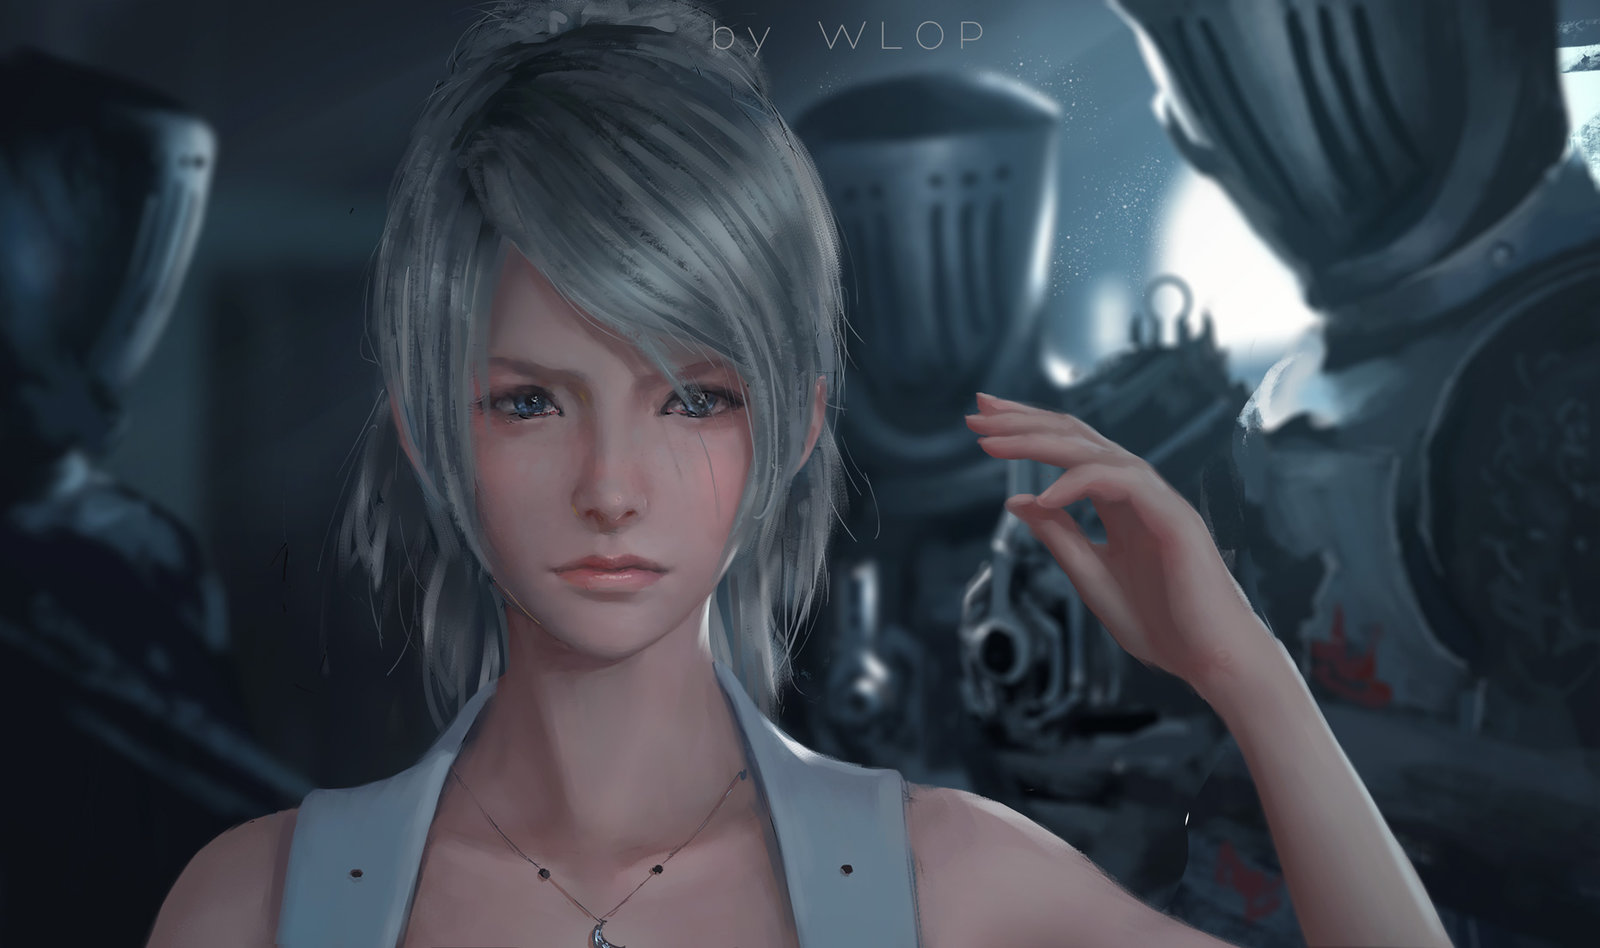 Final Fantasy XV Picture by Wang Ling